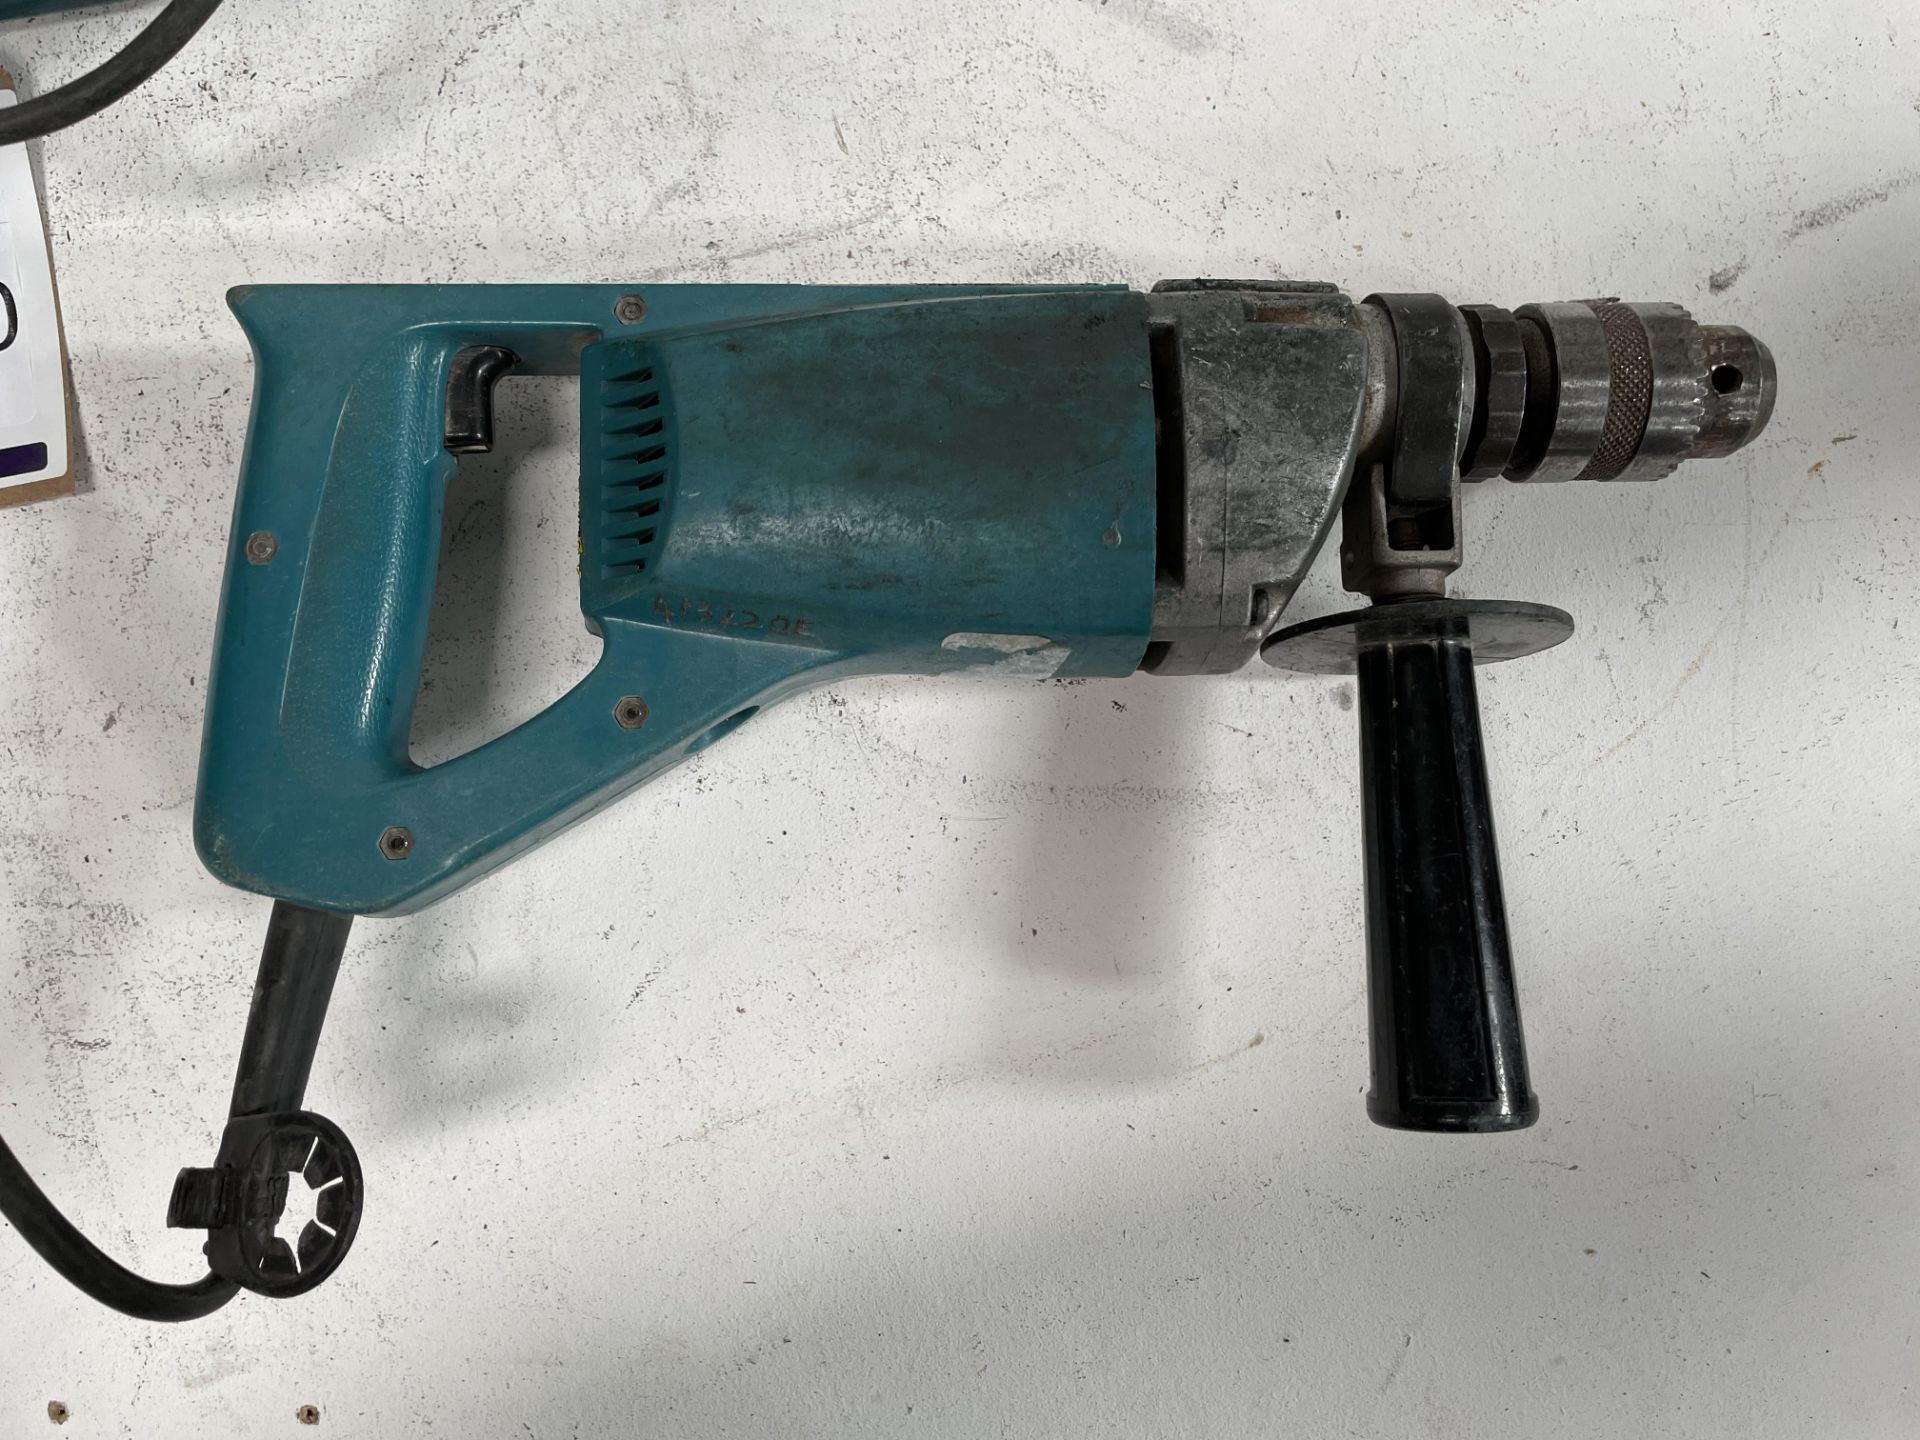 Bosch GBH 2-20SRE Hammer Drill, 110v (Location: Brentwood. Please Refer to General Notes) - Image 2 of 3